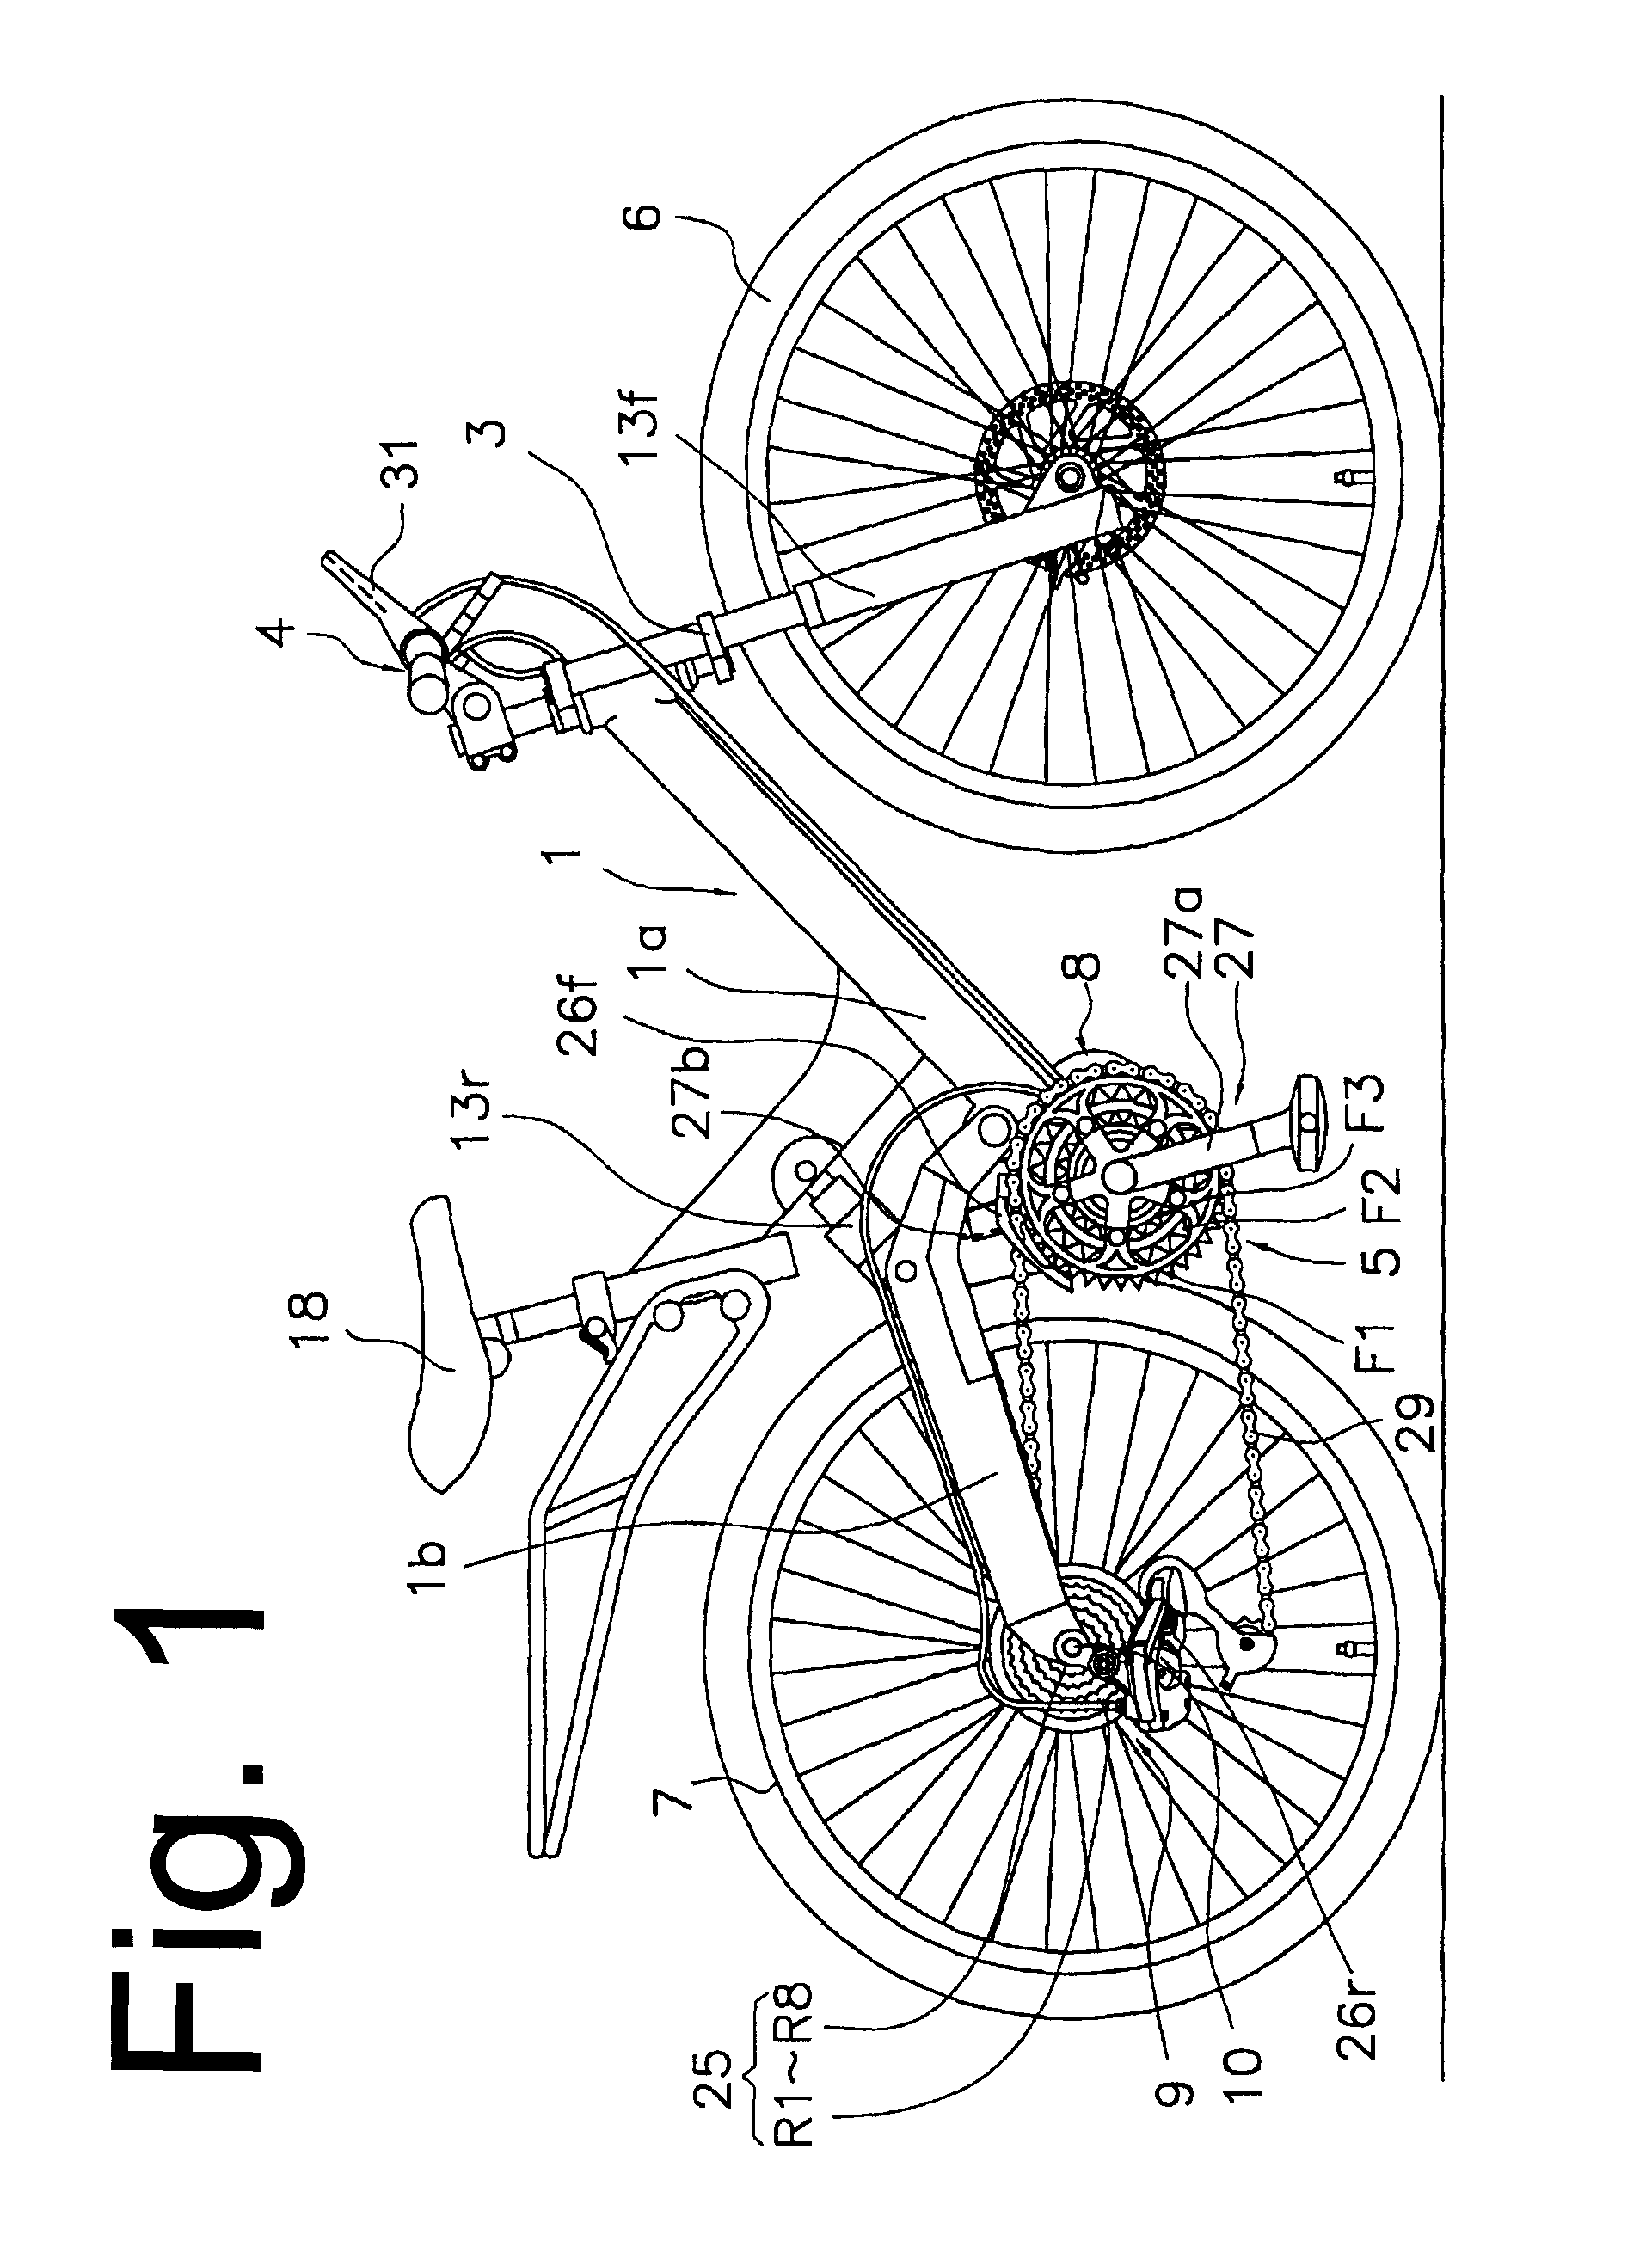 Bicycle shift control device that responds to a manually operated switch